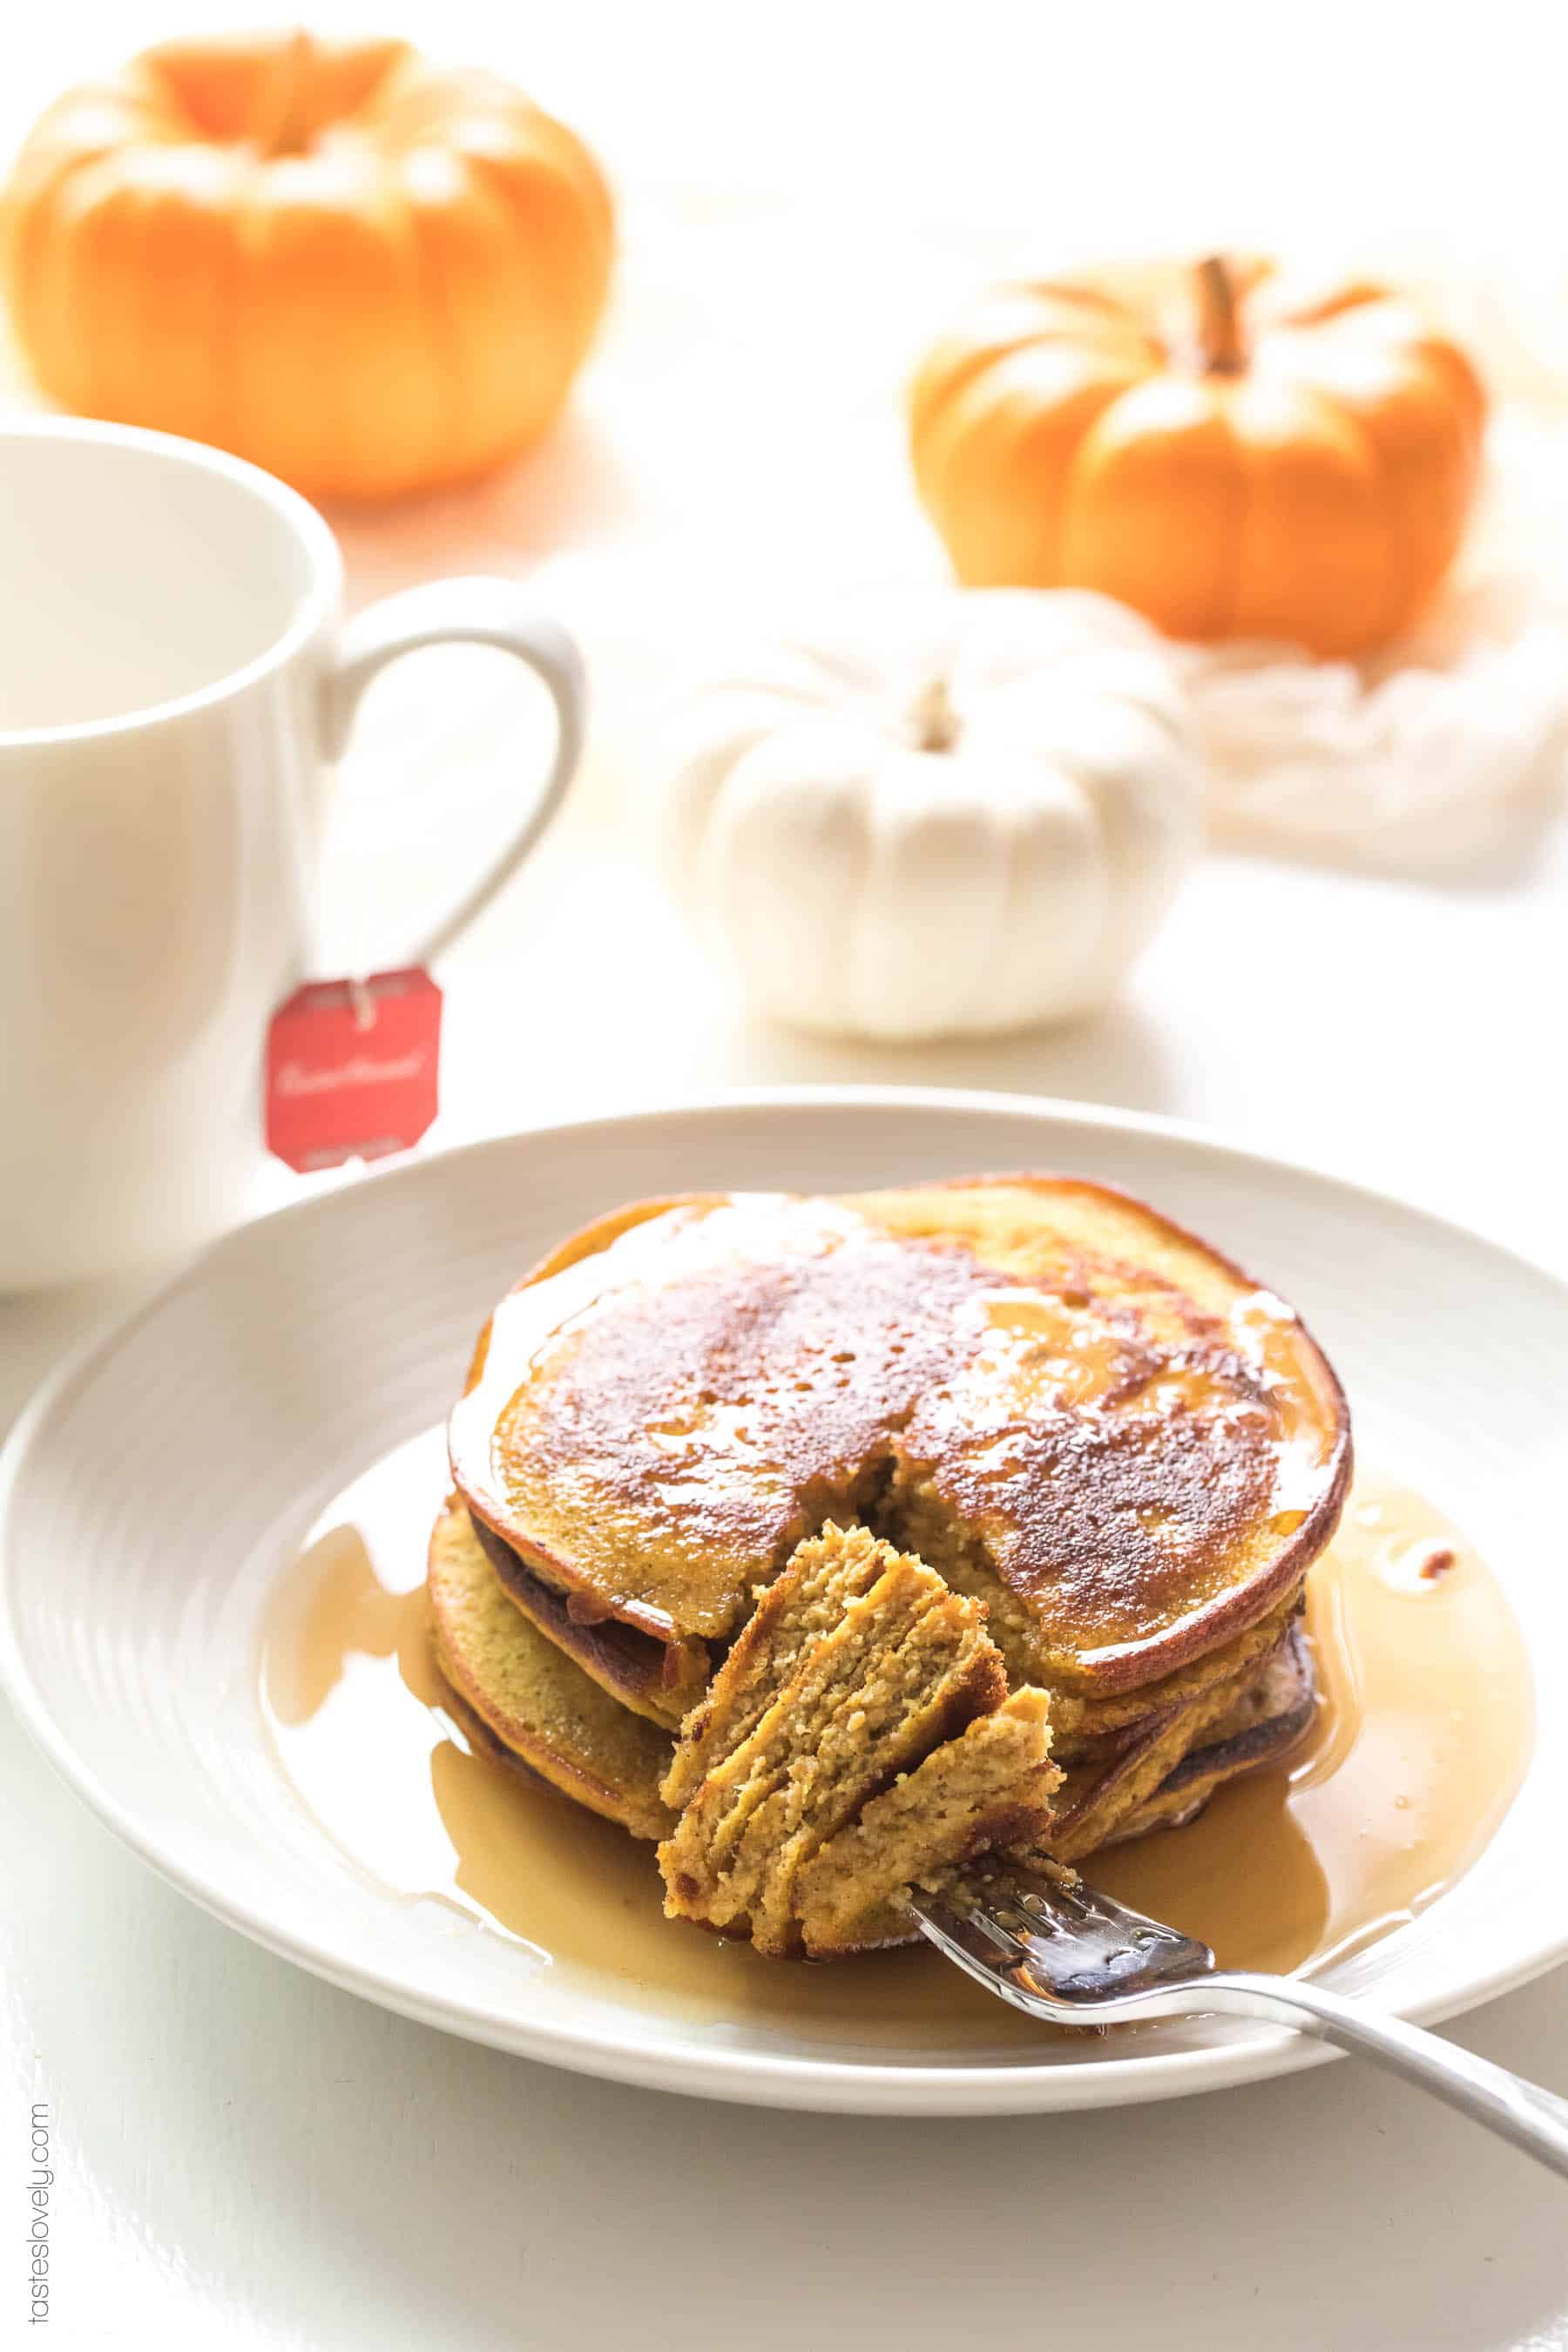 Paleo Pumpkin Pancakes made with almond flour and coconut flour. Light and fluffy pancakes packed with pumpkin flavor! Paleo, gluten free, grain free, dairy free, refined sugar free, clean eating.